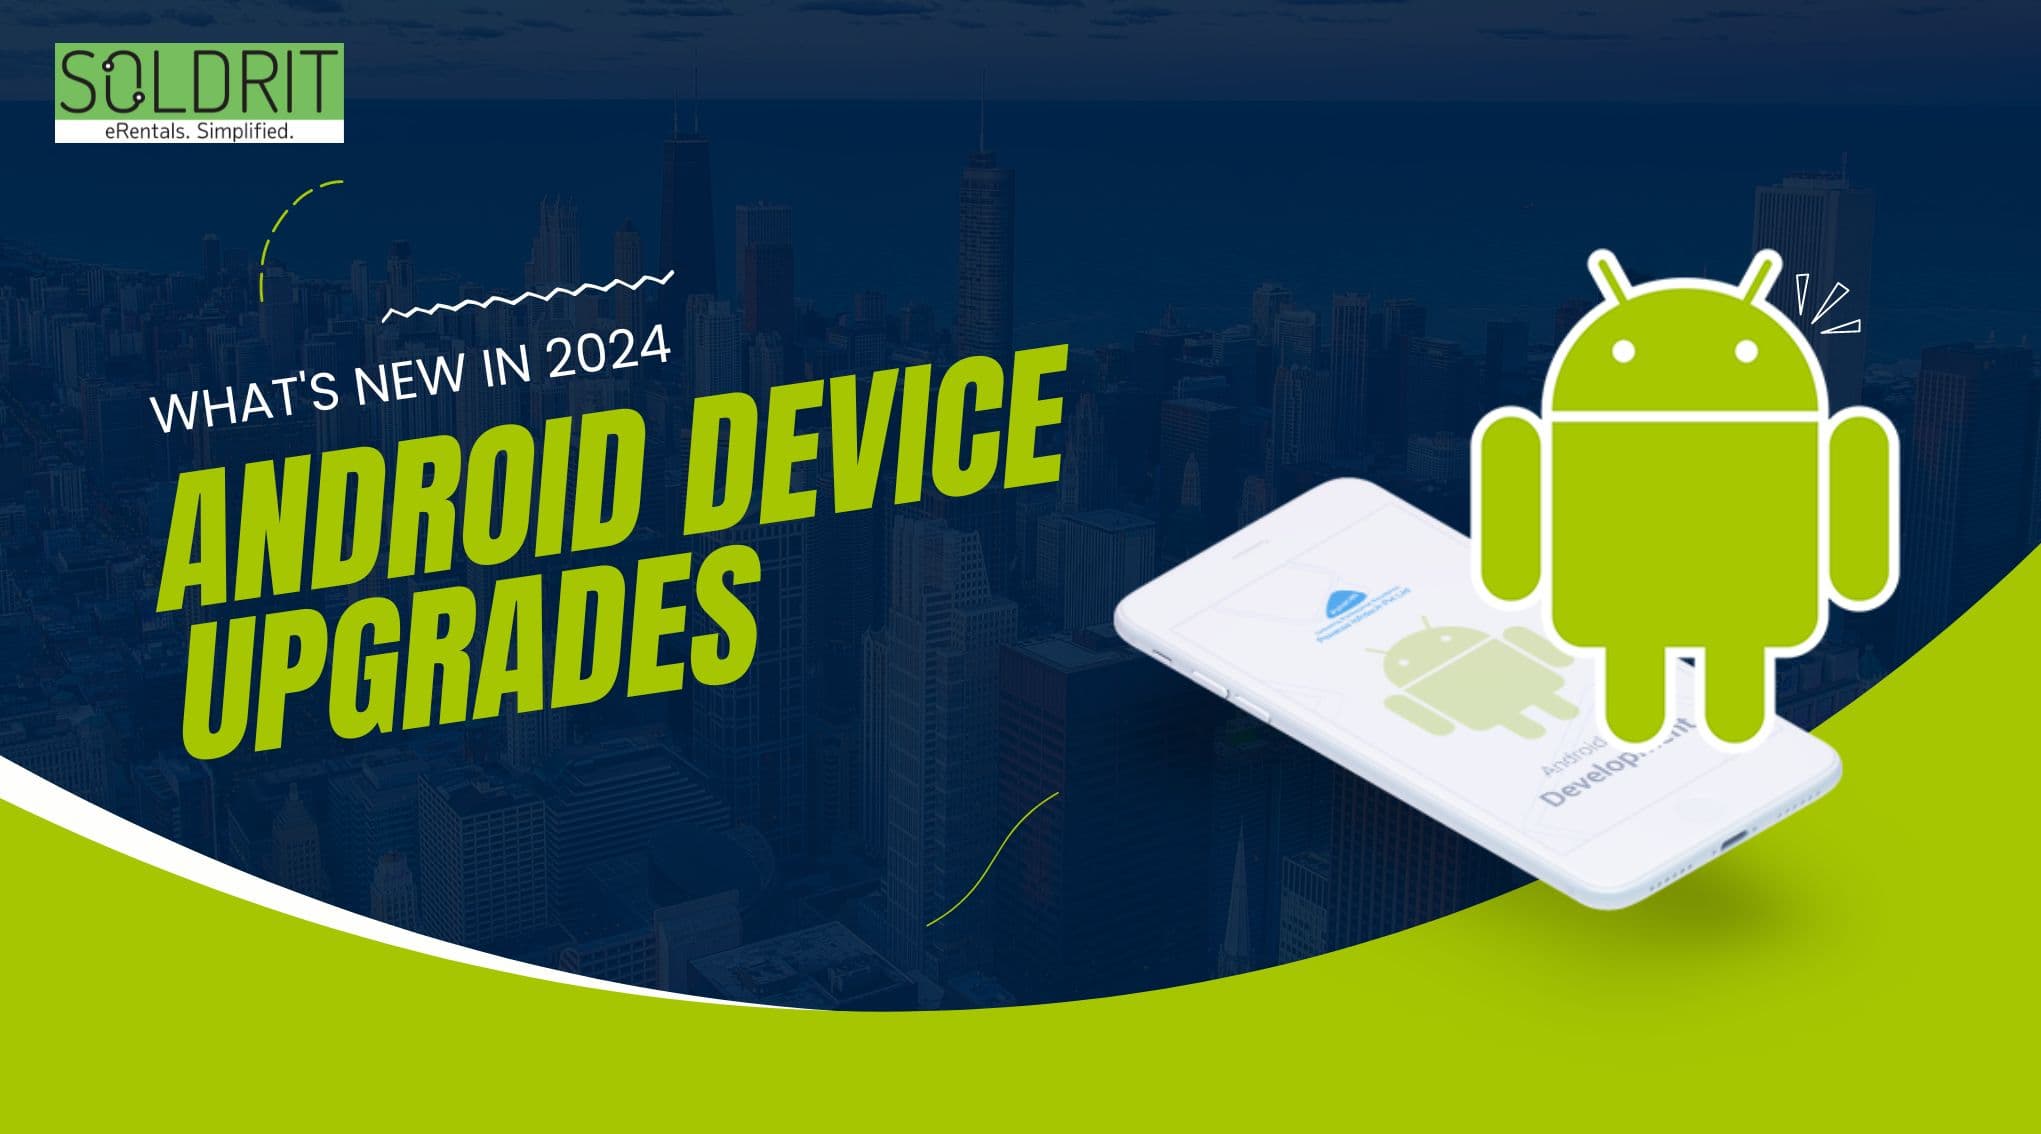 Android Device Upgrades What’s New in 2024